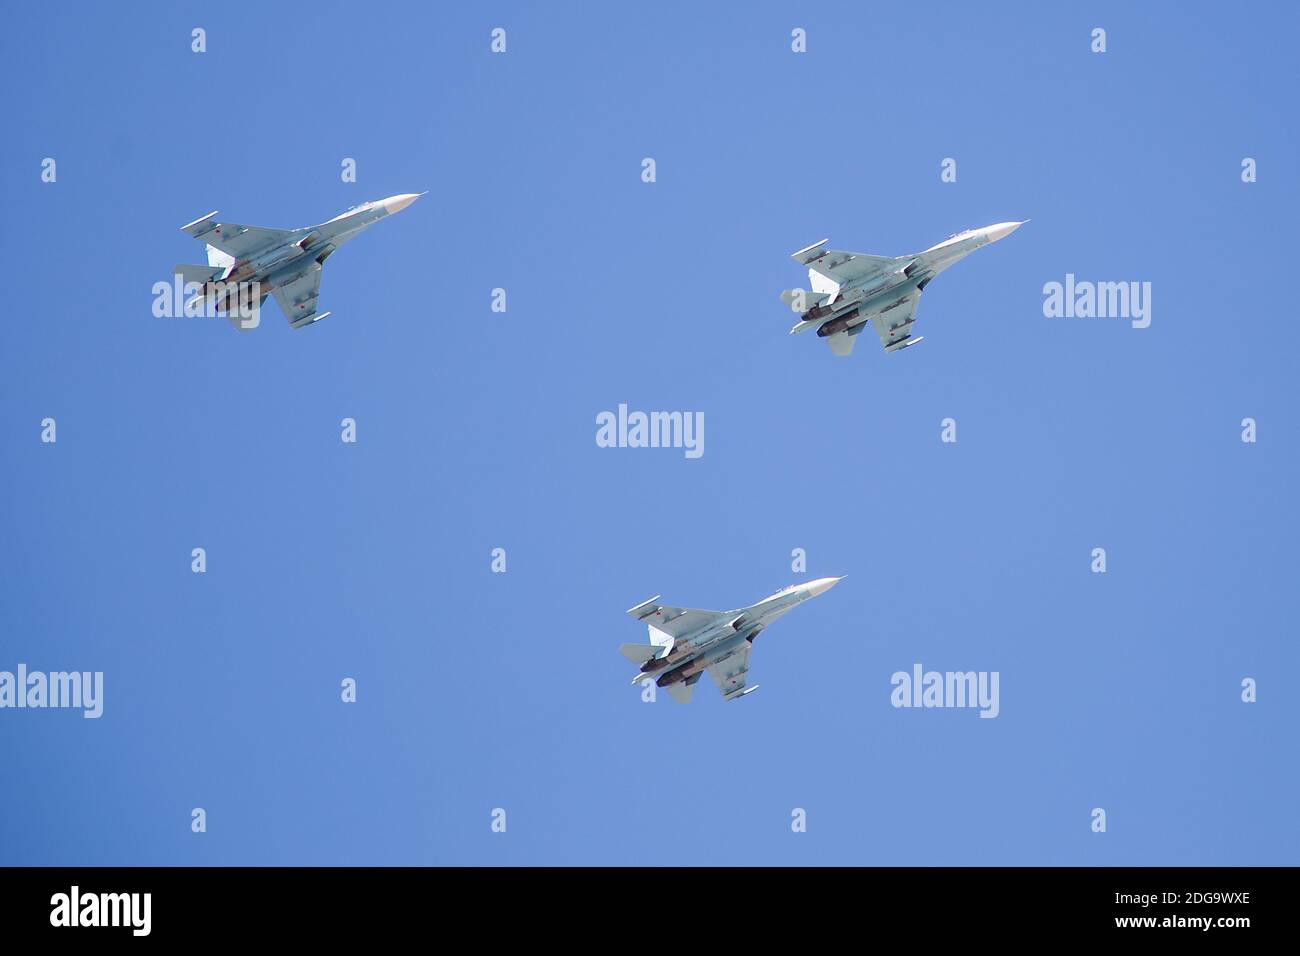 07.26.2020. Russia, St. Petersburg: Aviation parade. The military aviation parade on the Day of the Navy. A group of multipurpose all-weather fighters Stock Photo